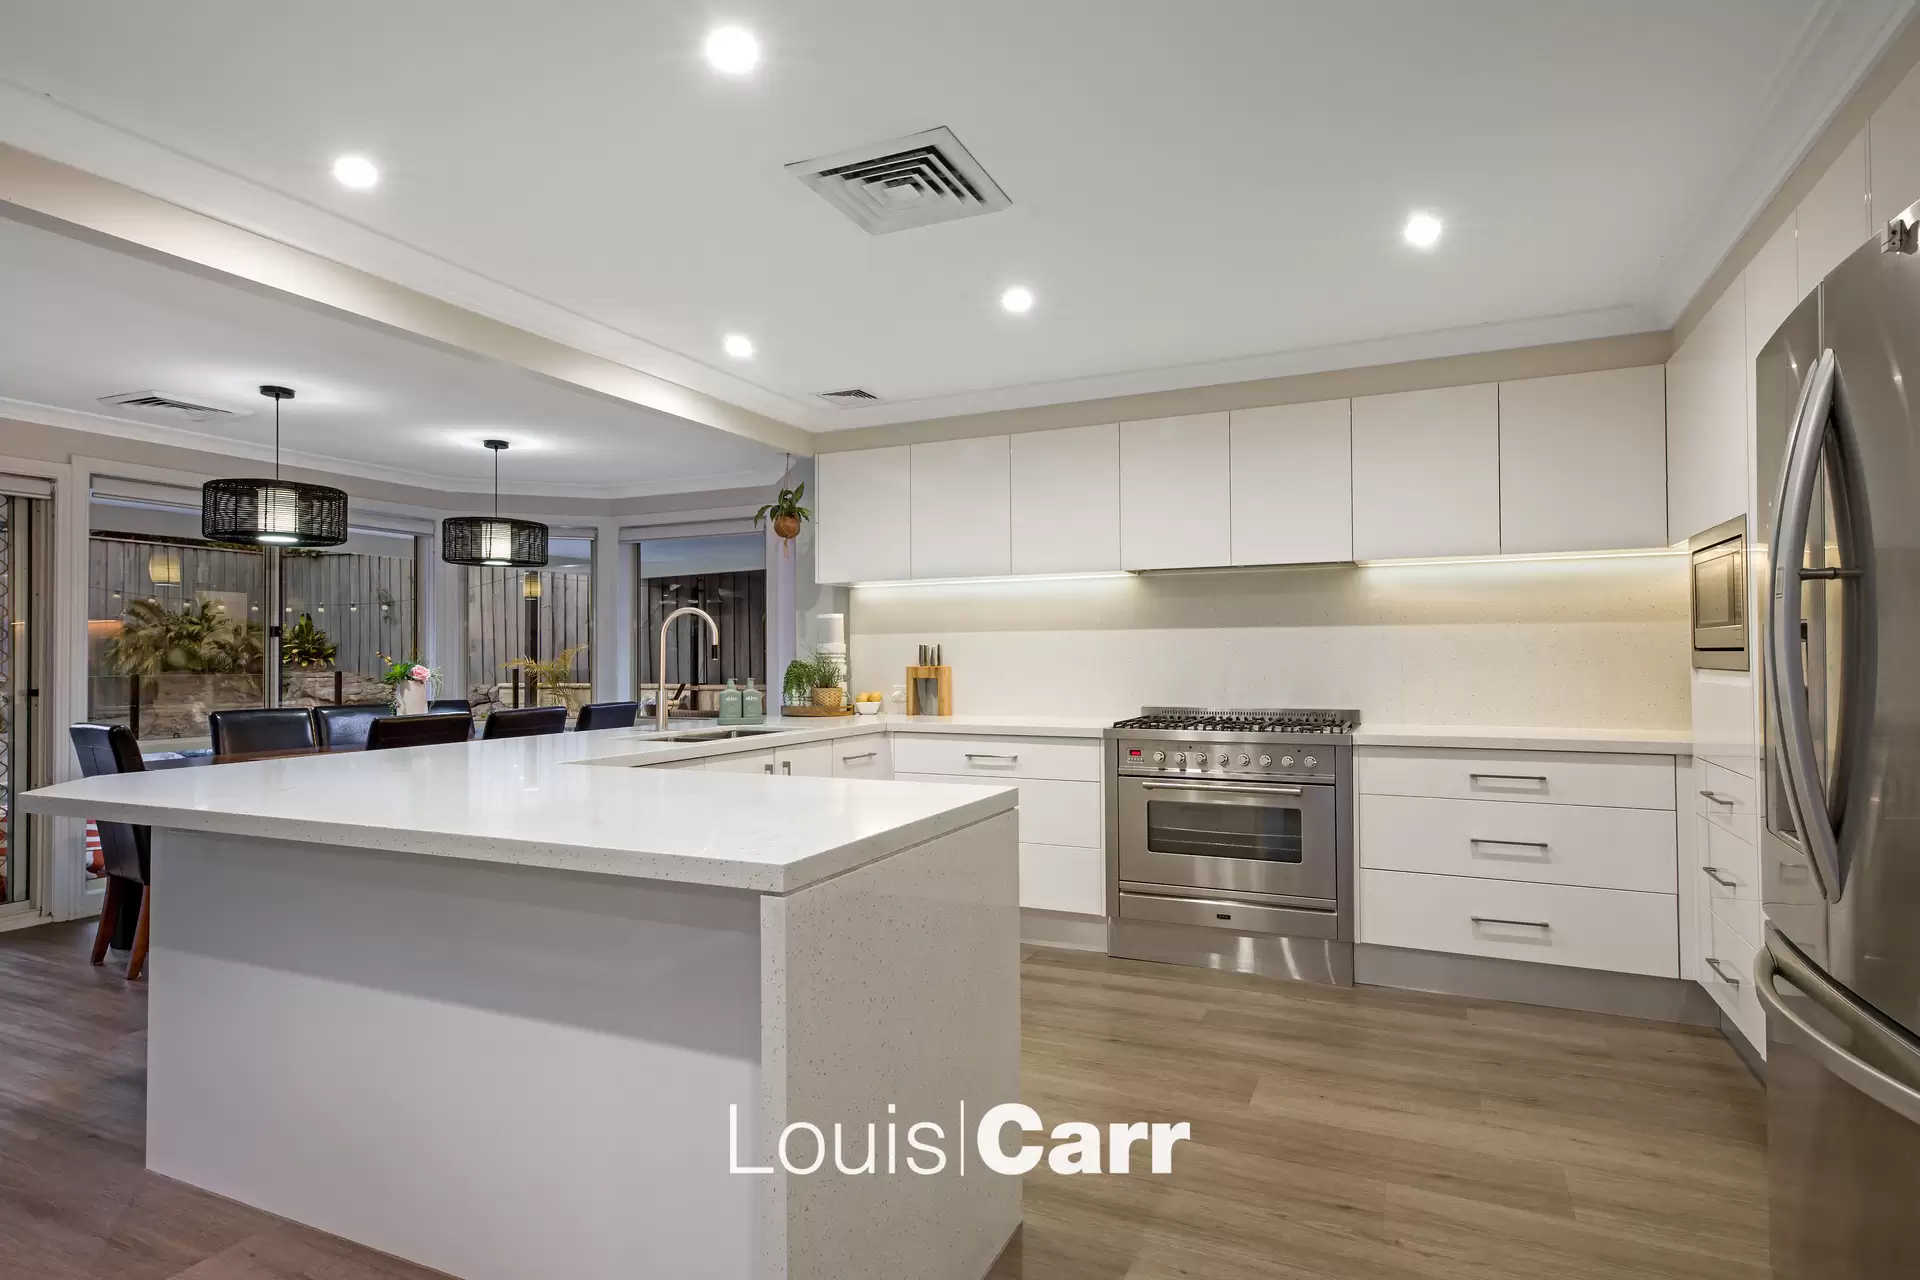 Photo #4: 4 Rooke Court, Kellyville - Sold by Louis Carr Real Estate